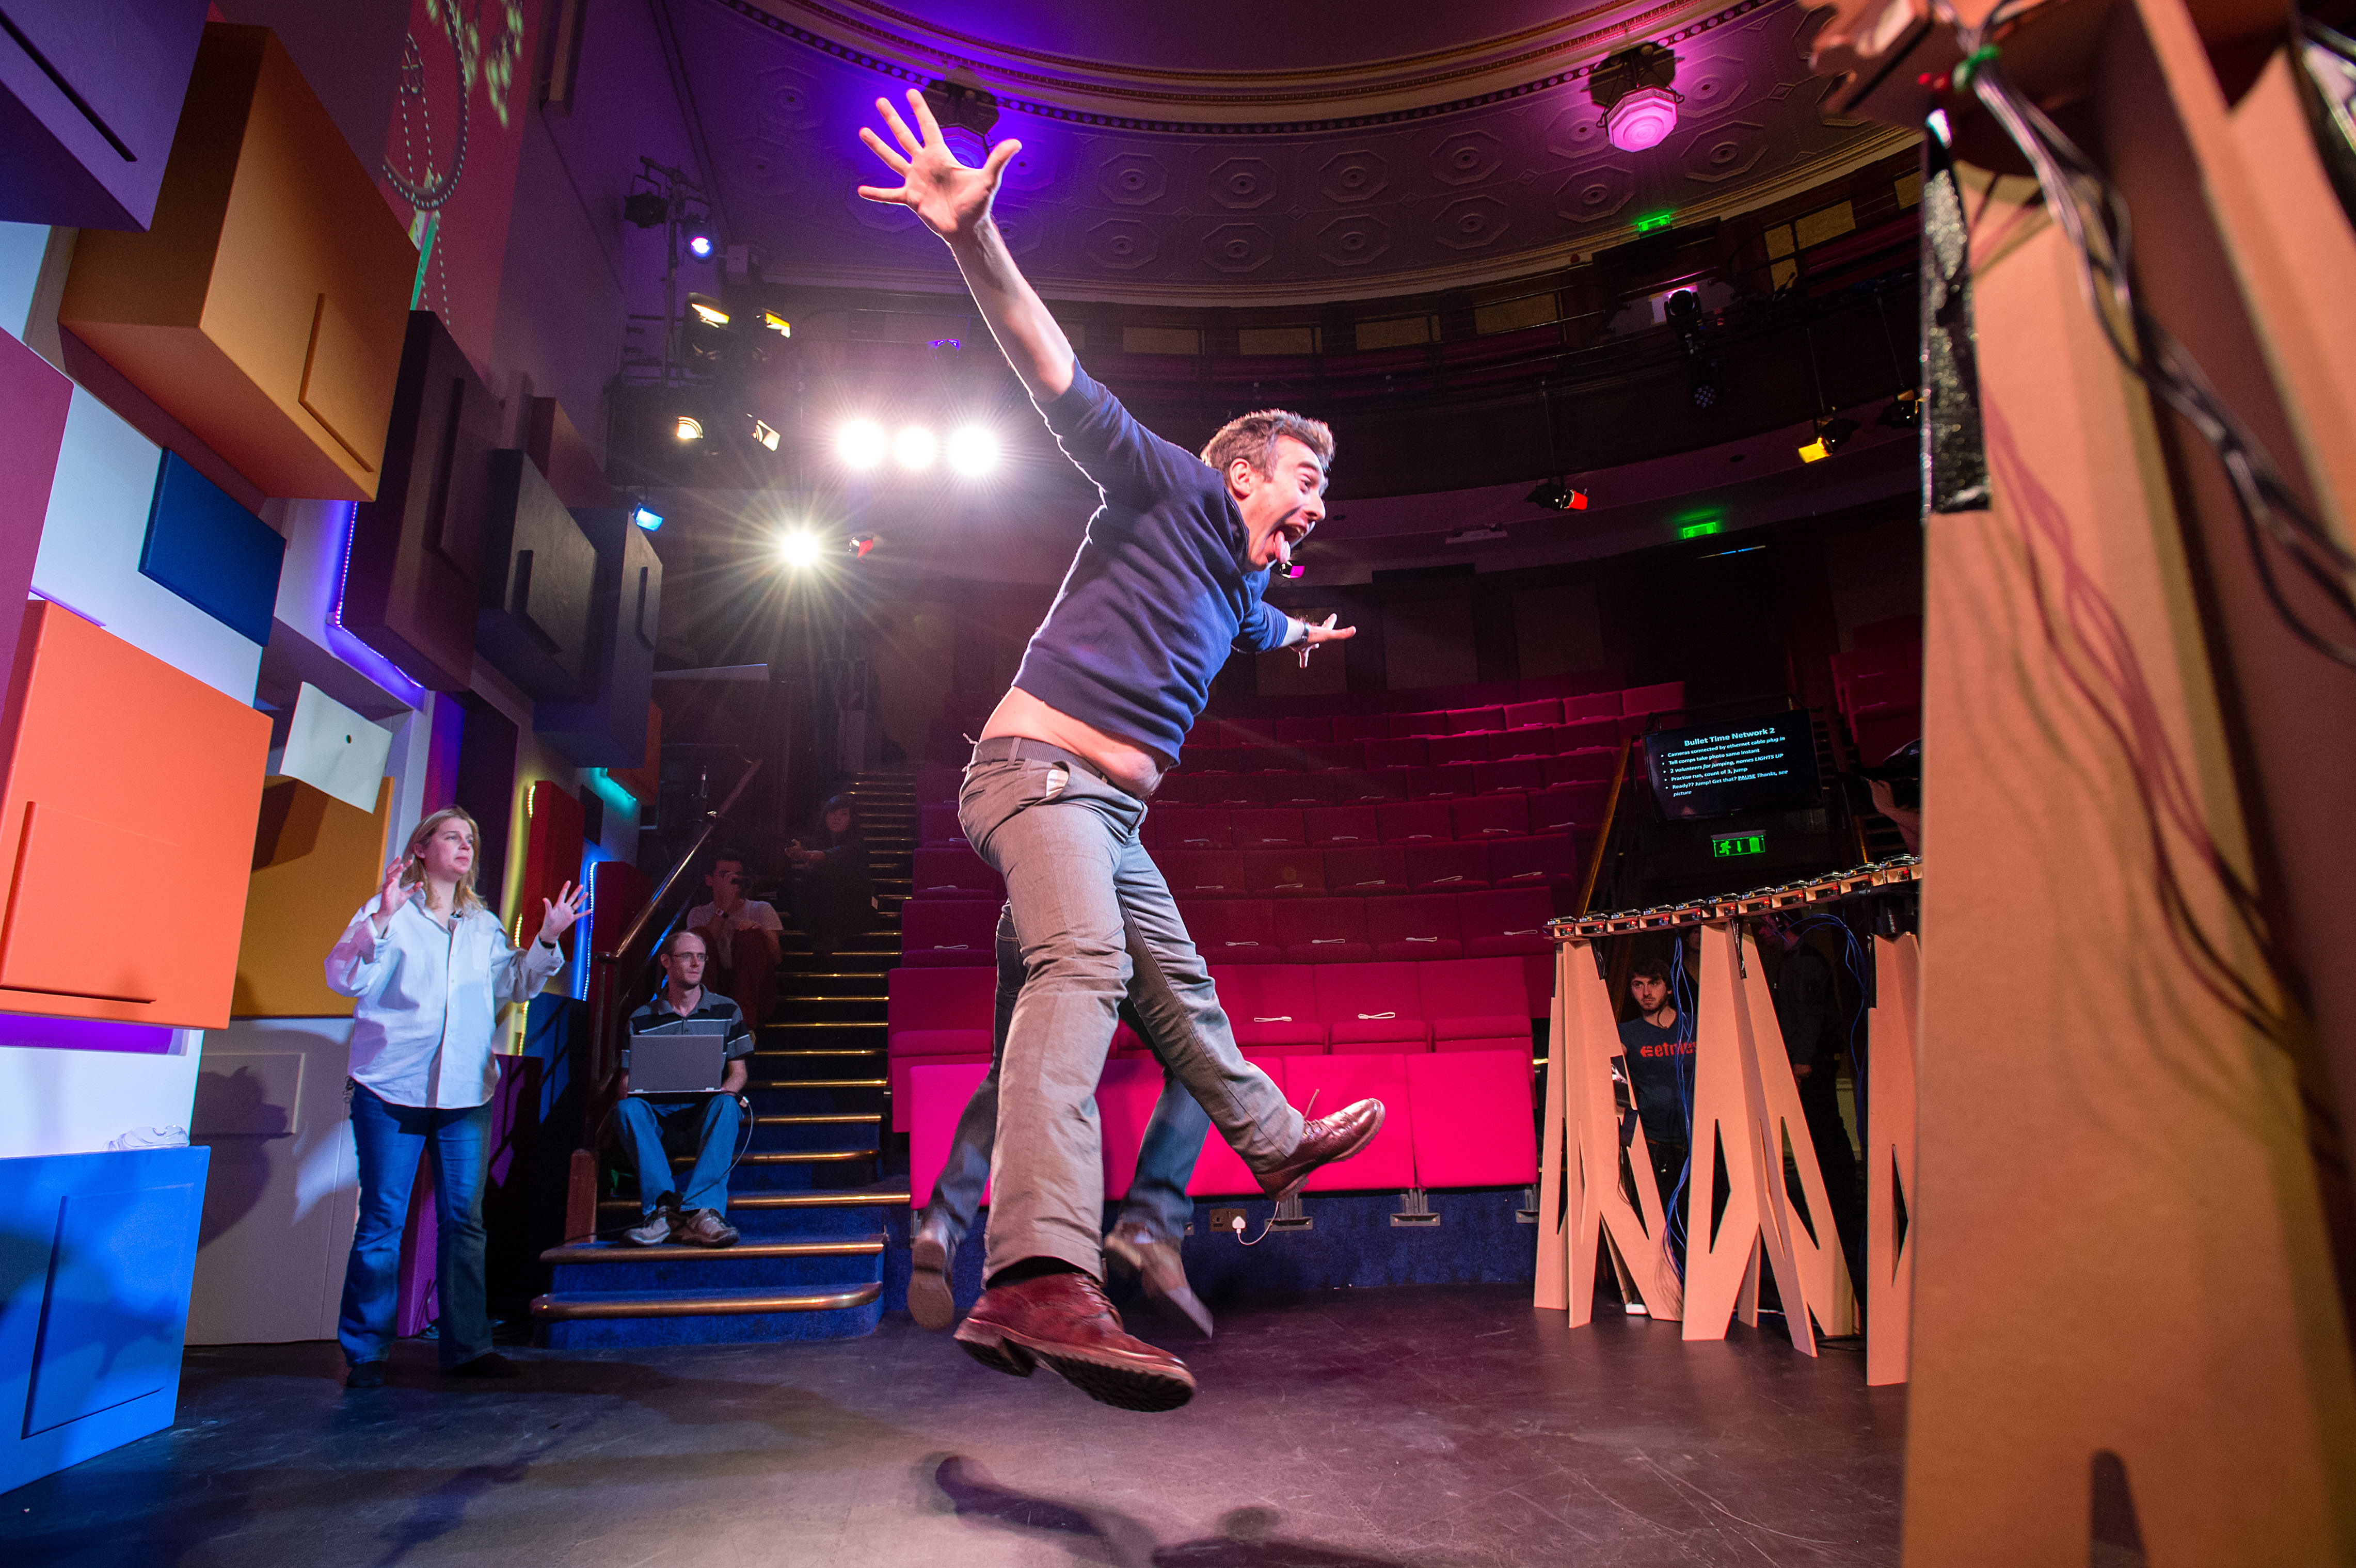 Dallas jumps at Royal Institution Christmas Lecture rehearsal